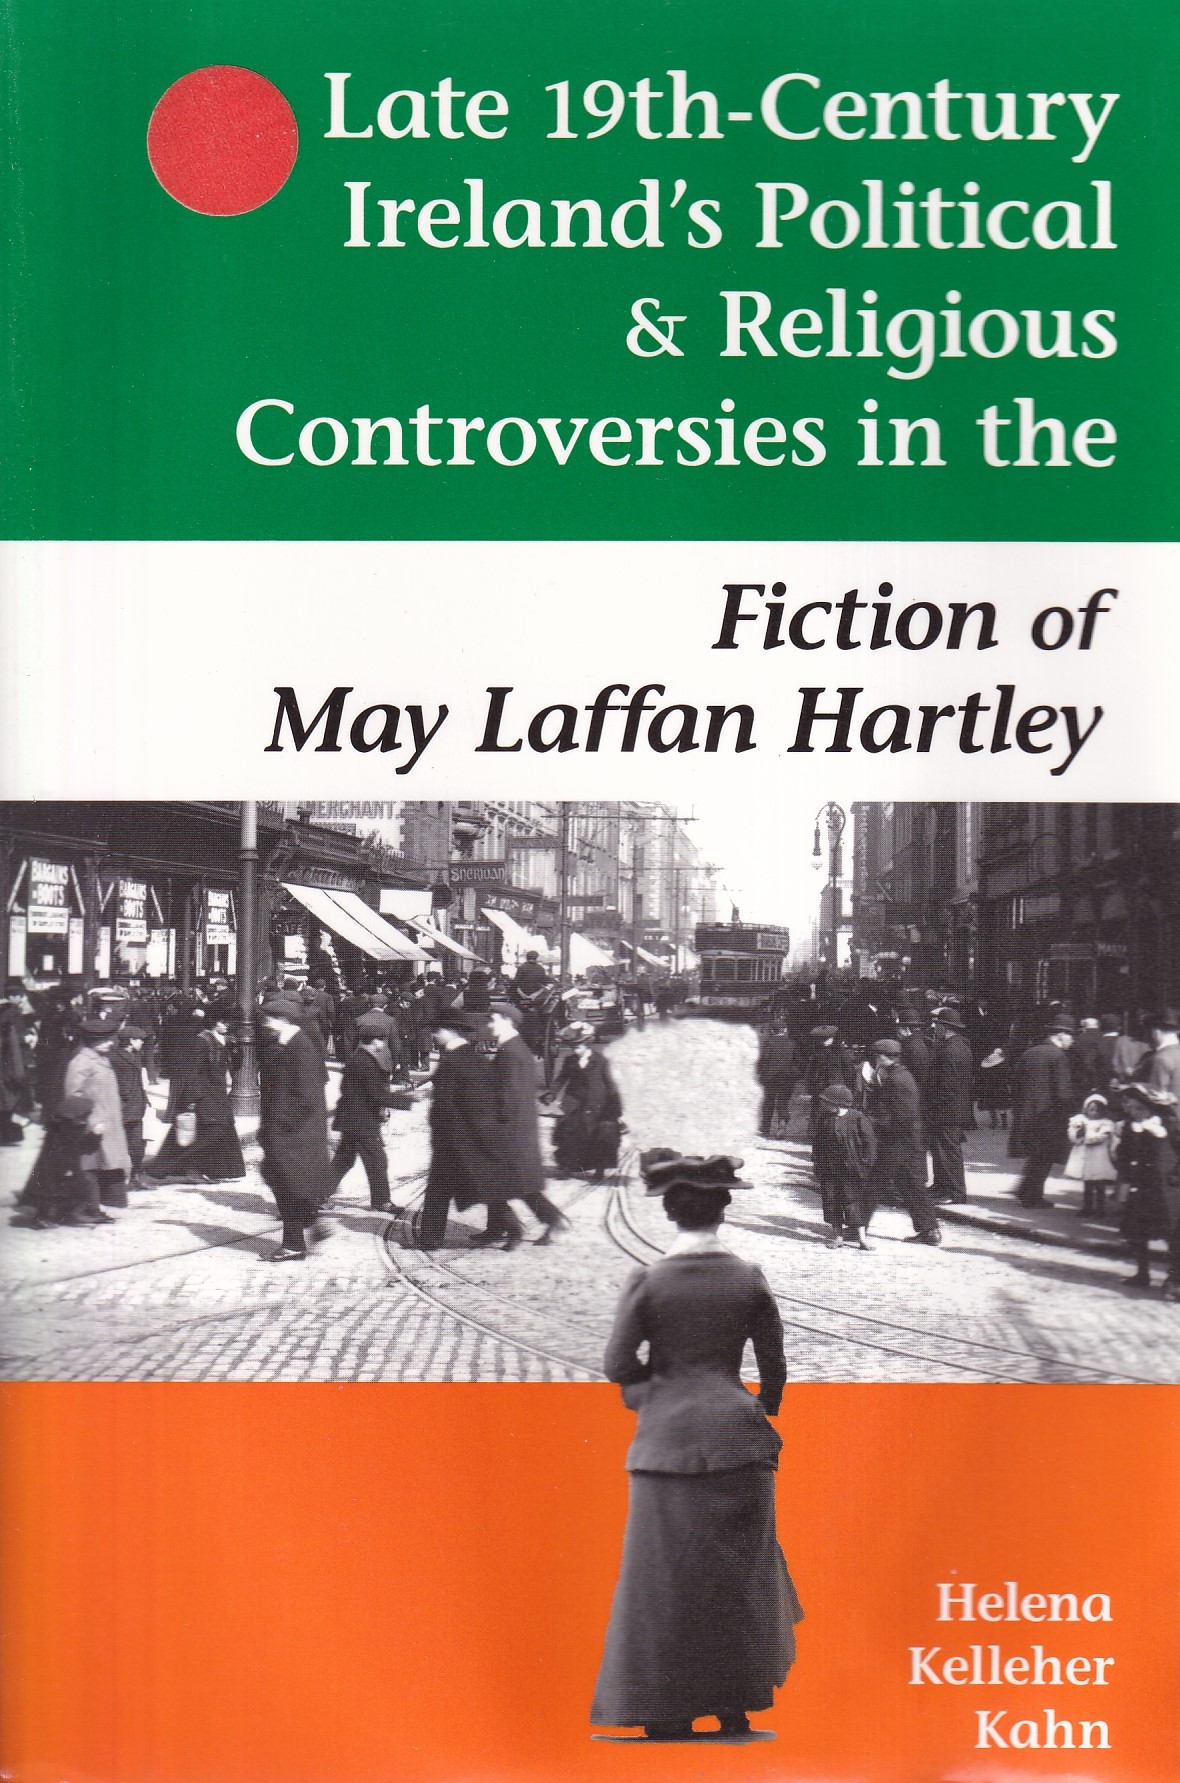 Late 19th-Century Ireland’s Political & Religious Controversies in the Fiction of May Laffan Hartley by Helena Kelleher Kahn